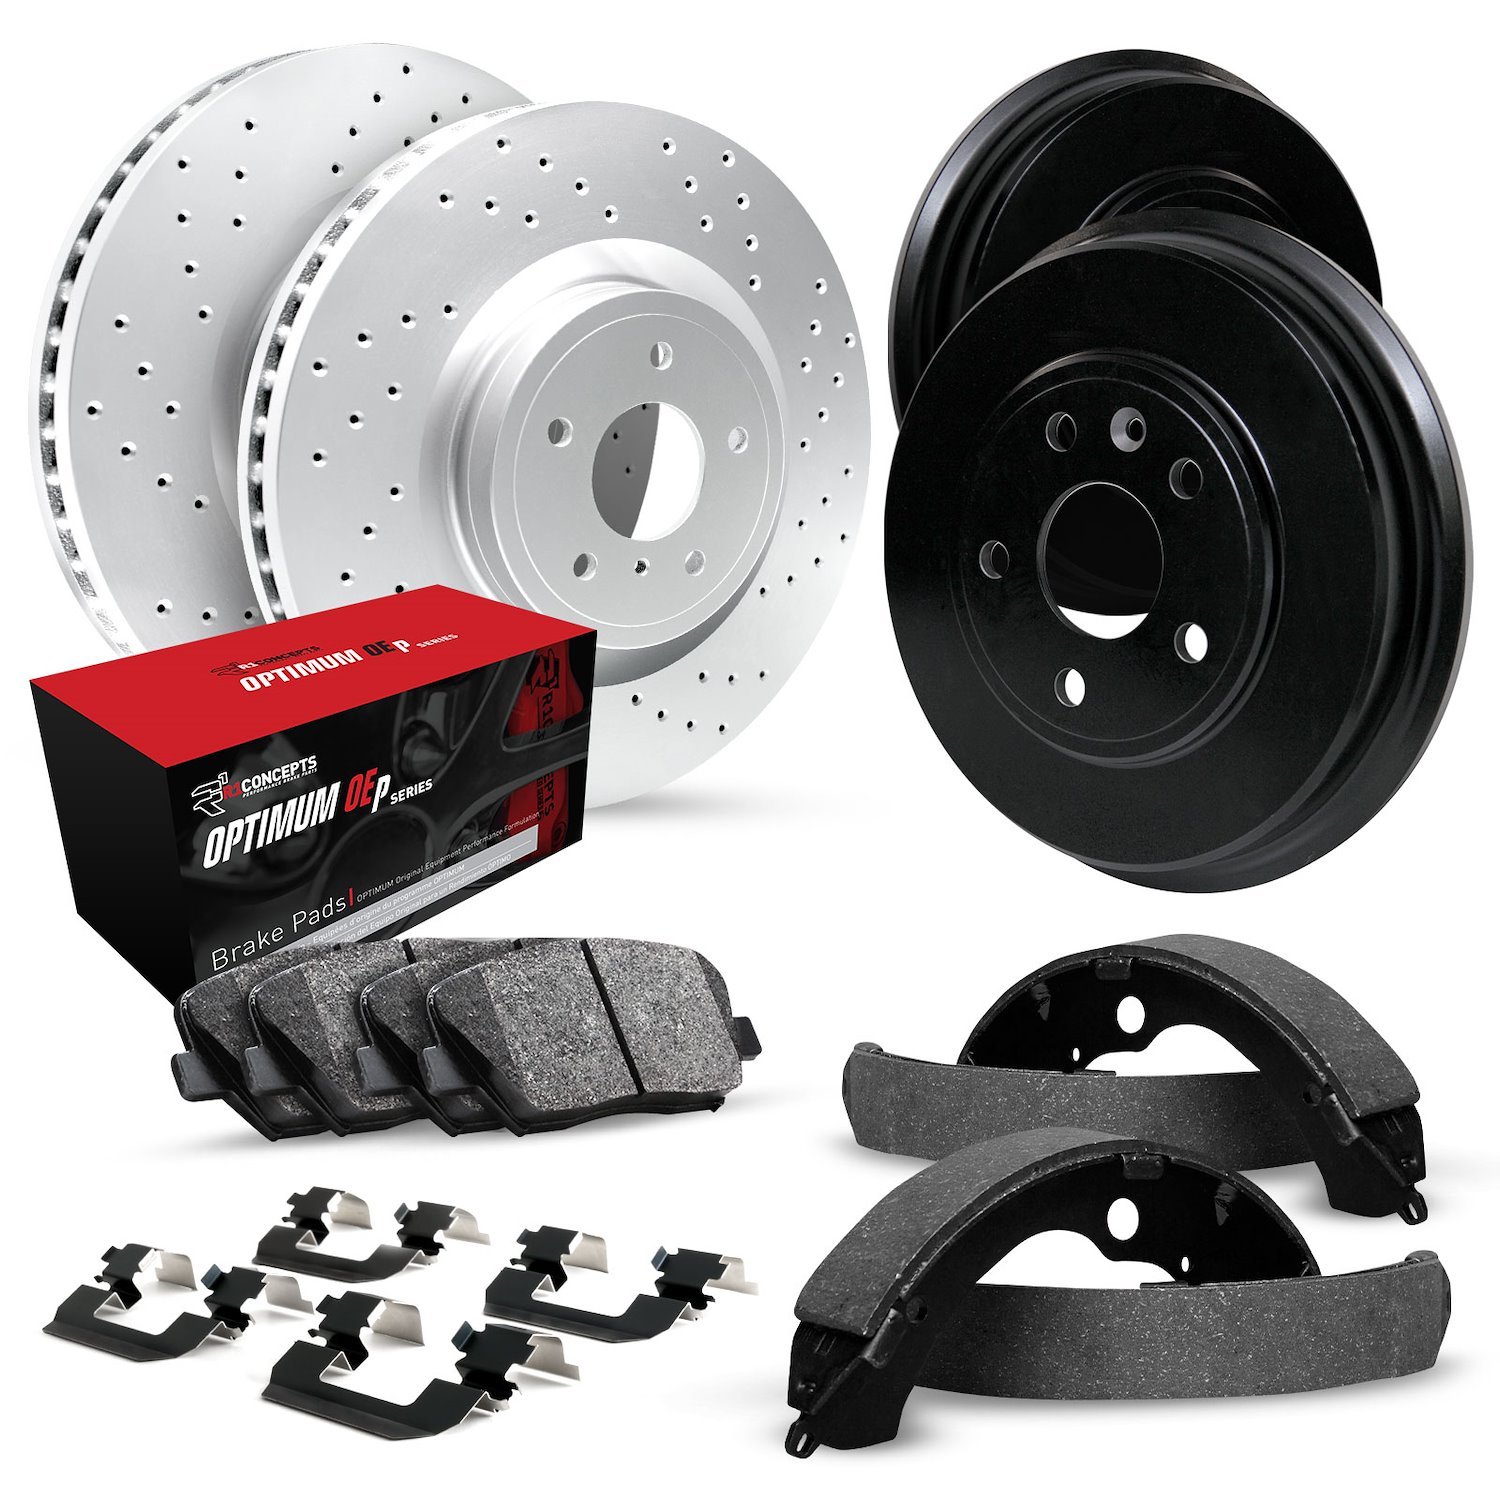 GEO-Carbon Drilled Brake Rotor & Drum Set w/Optimum OE Pads, Shoes, & Hardware, 1988-1989 Acura/Honda, Position: Front & Rear